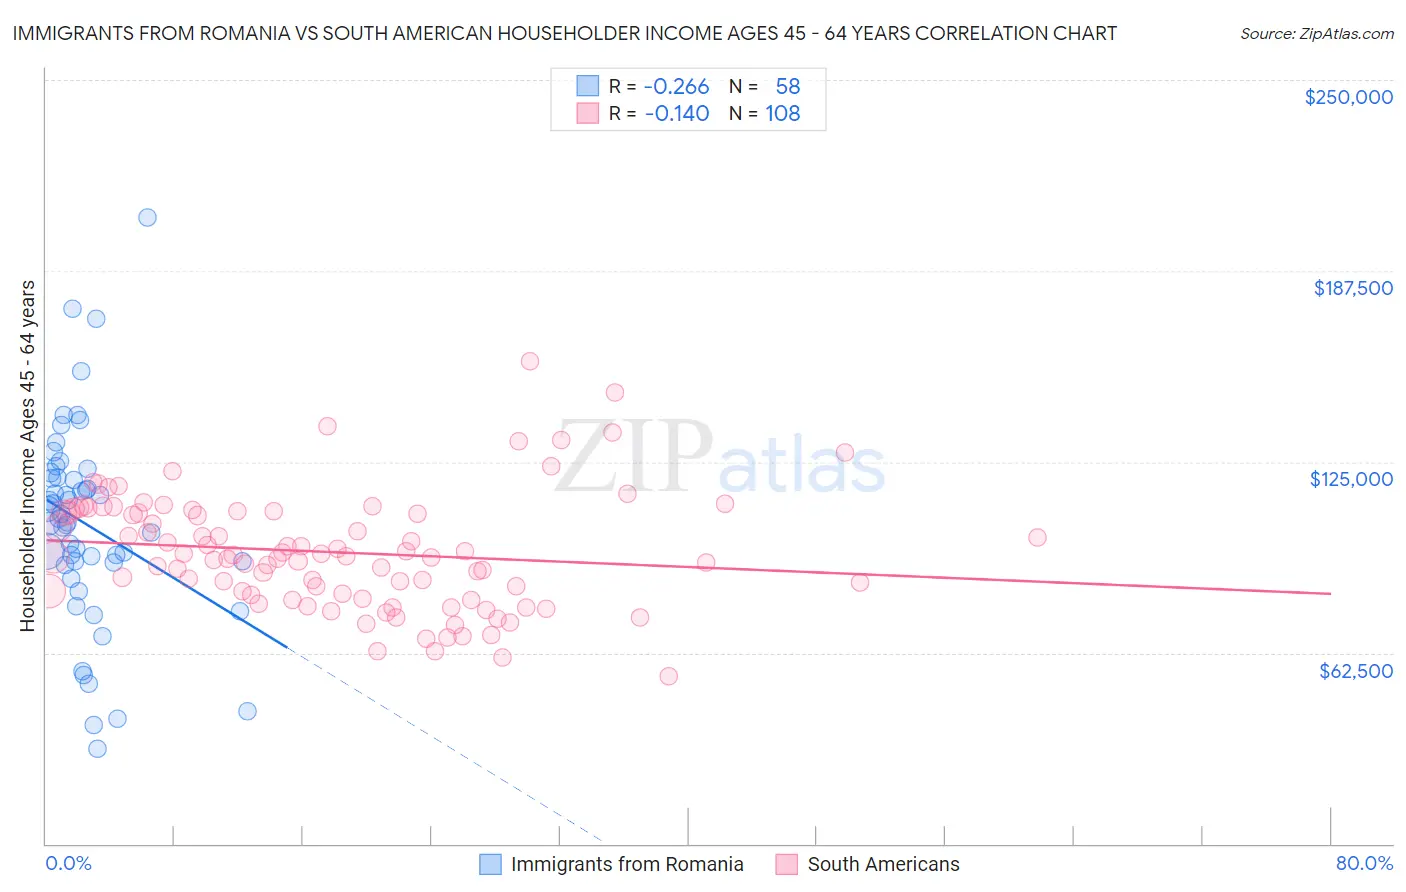 Immigrants from Romania vs South American Householder Income Ages 45 - 64 years